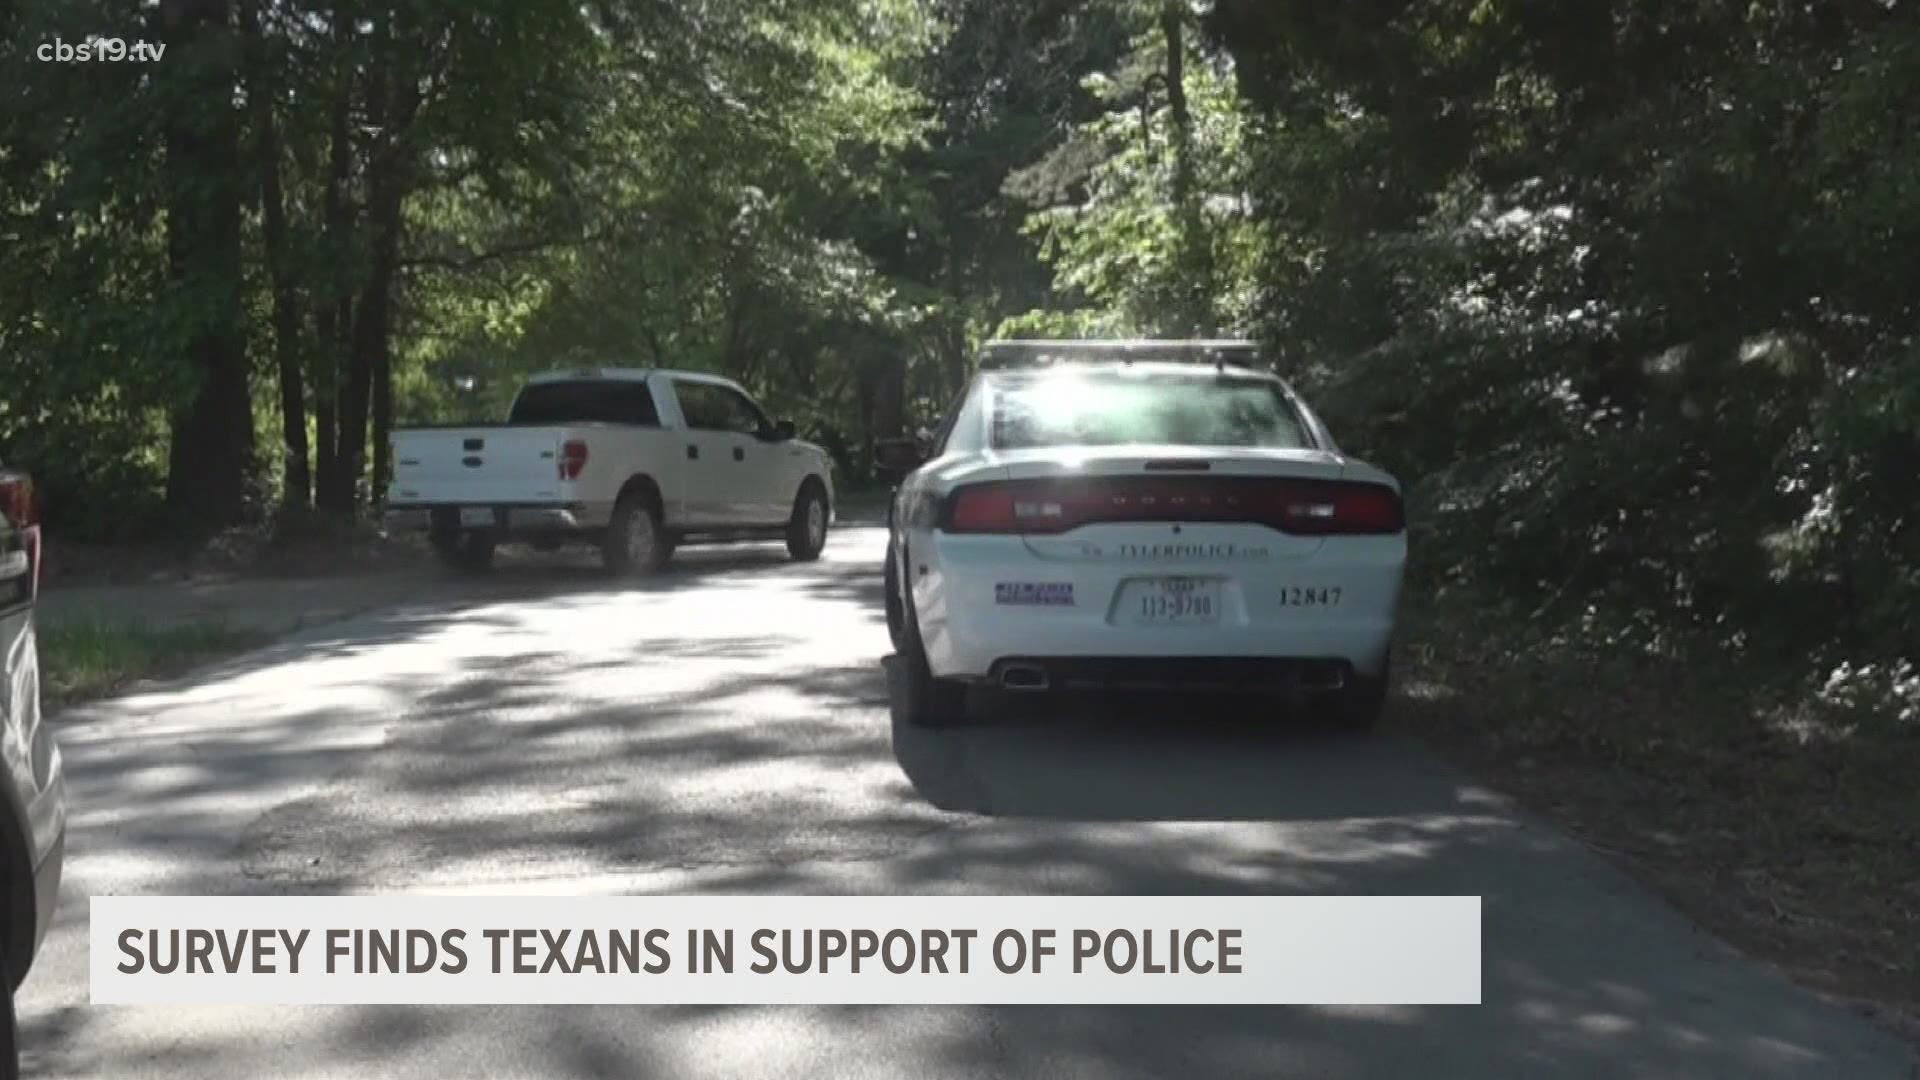 "72% of Texans say that they still have full faith in their local law enforcement officers, that has not changed."